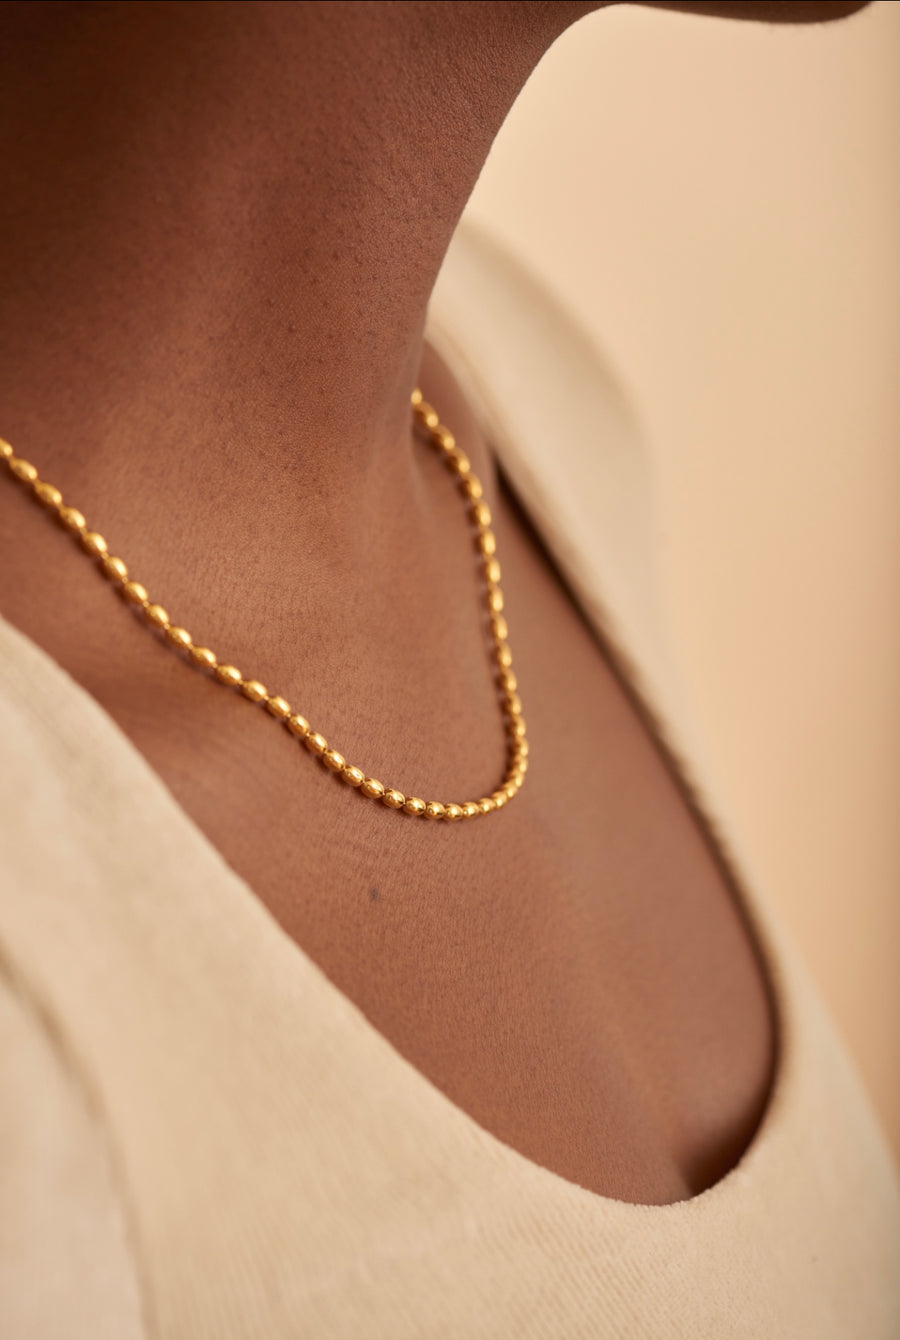 The Ekan Necklace